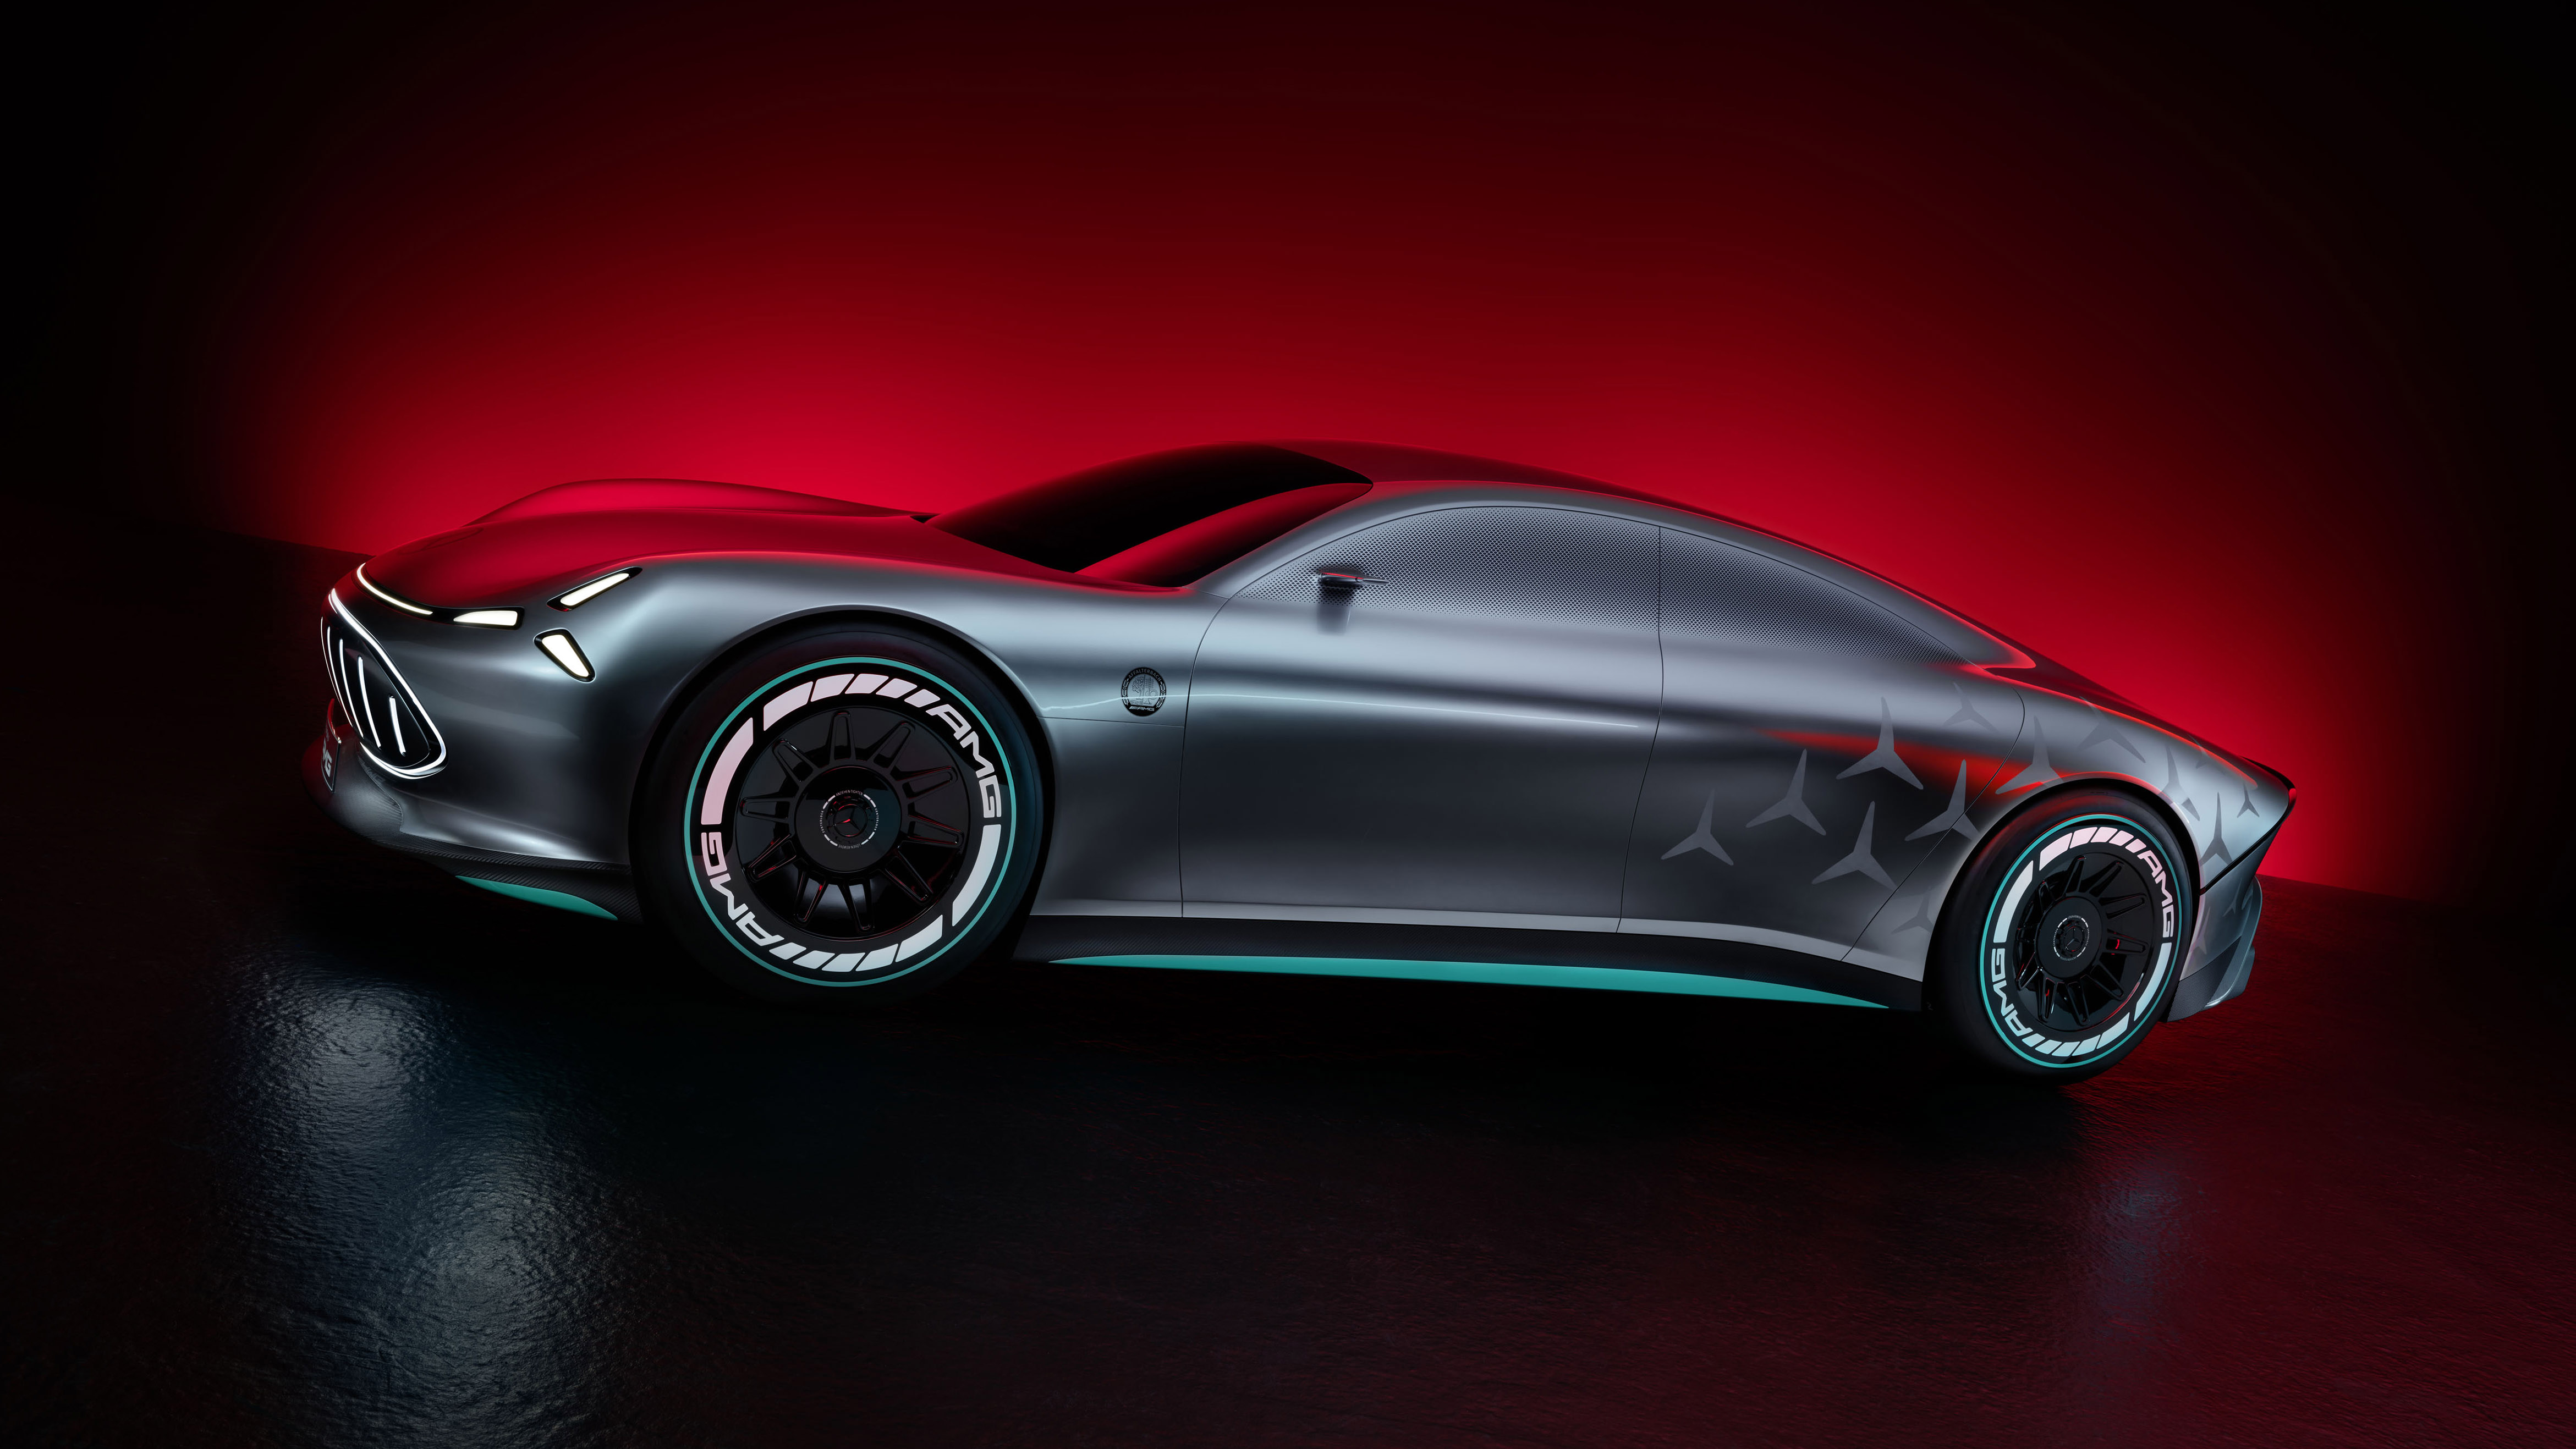 Vision AMG Concept